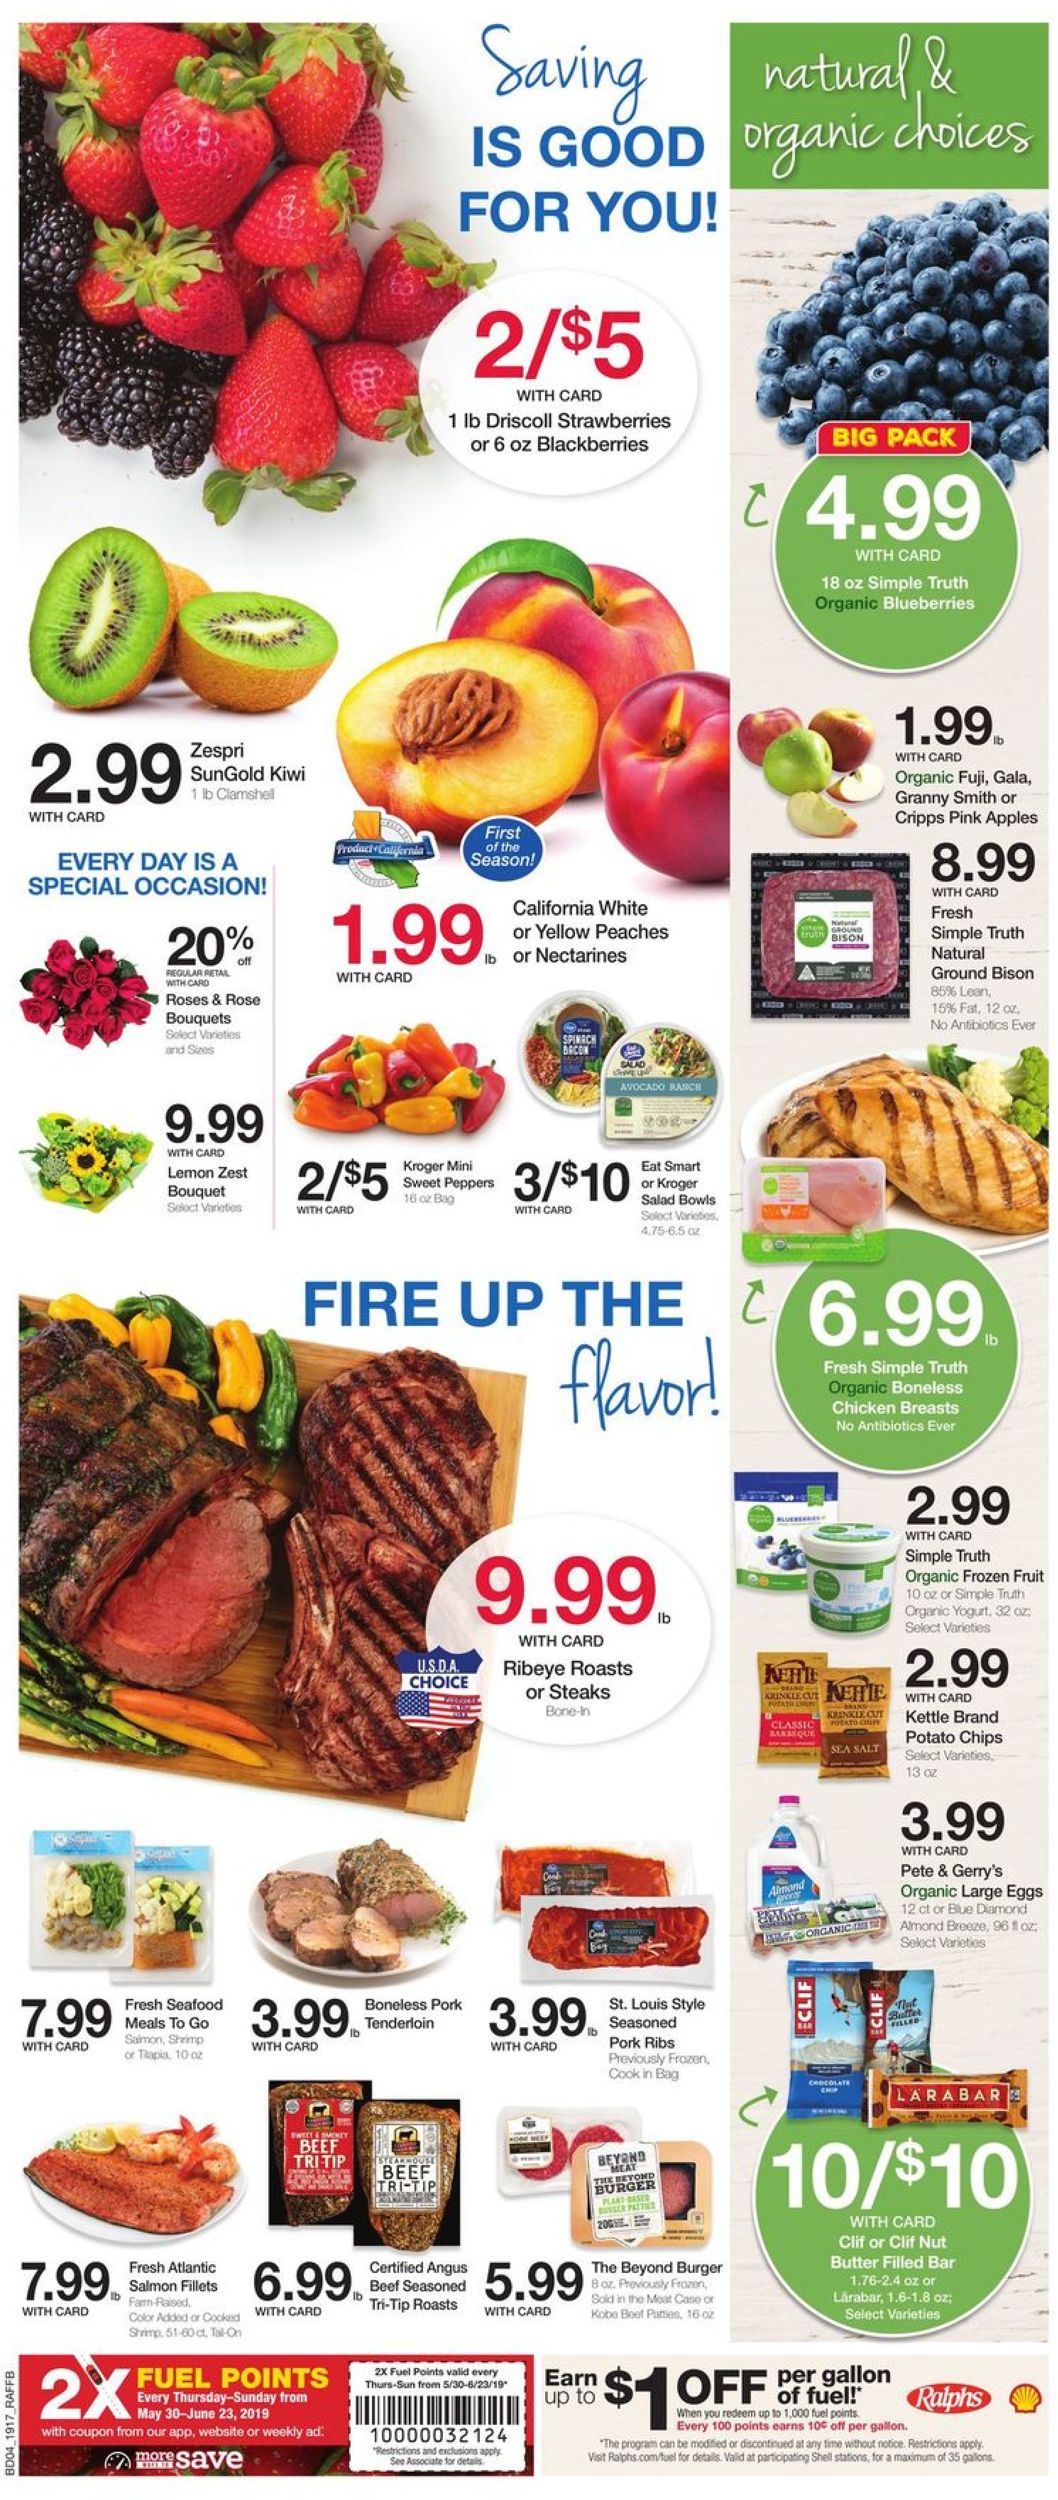 Catalogue Ralphs from 05/29/2019